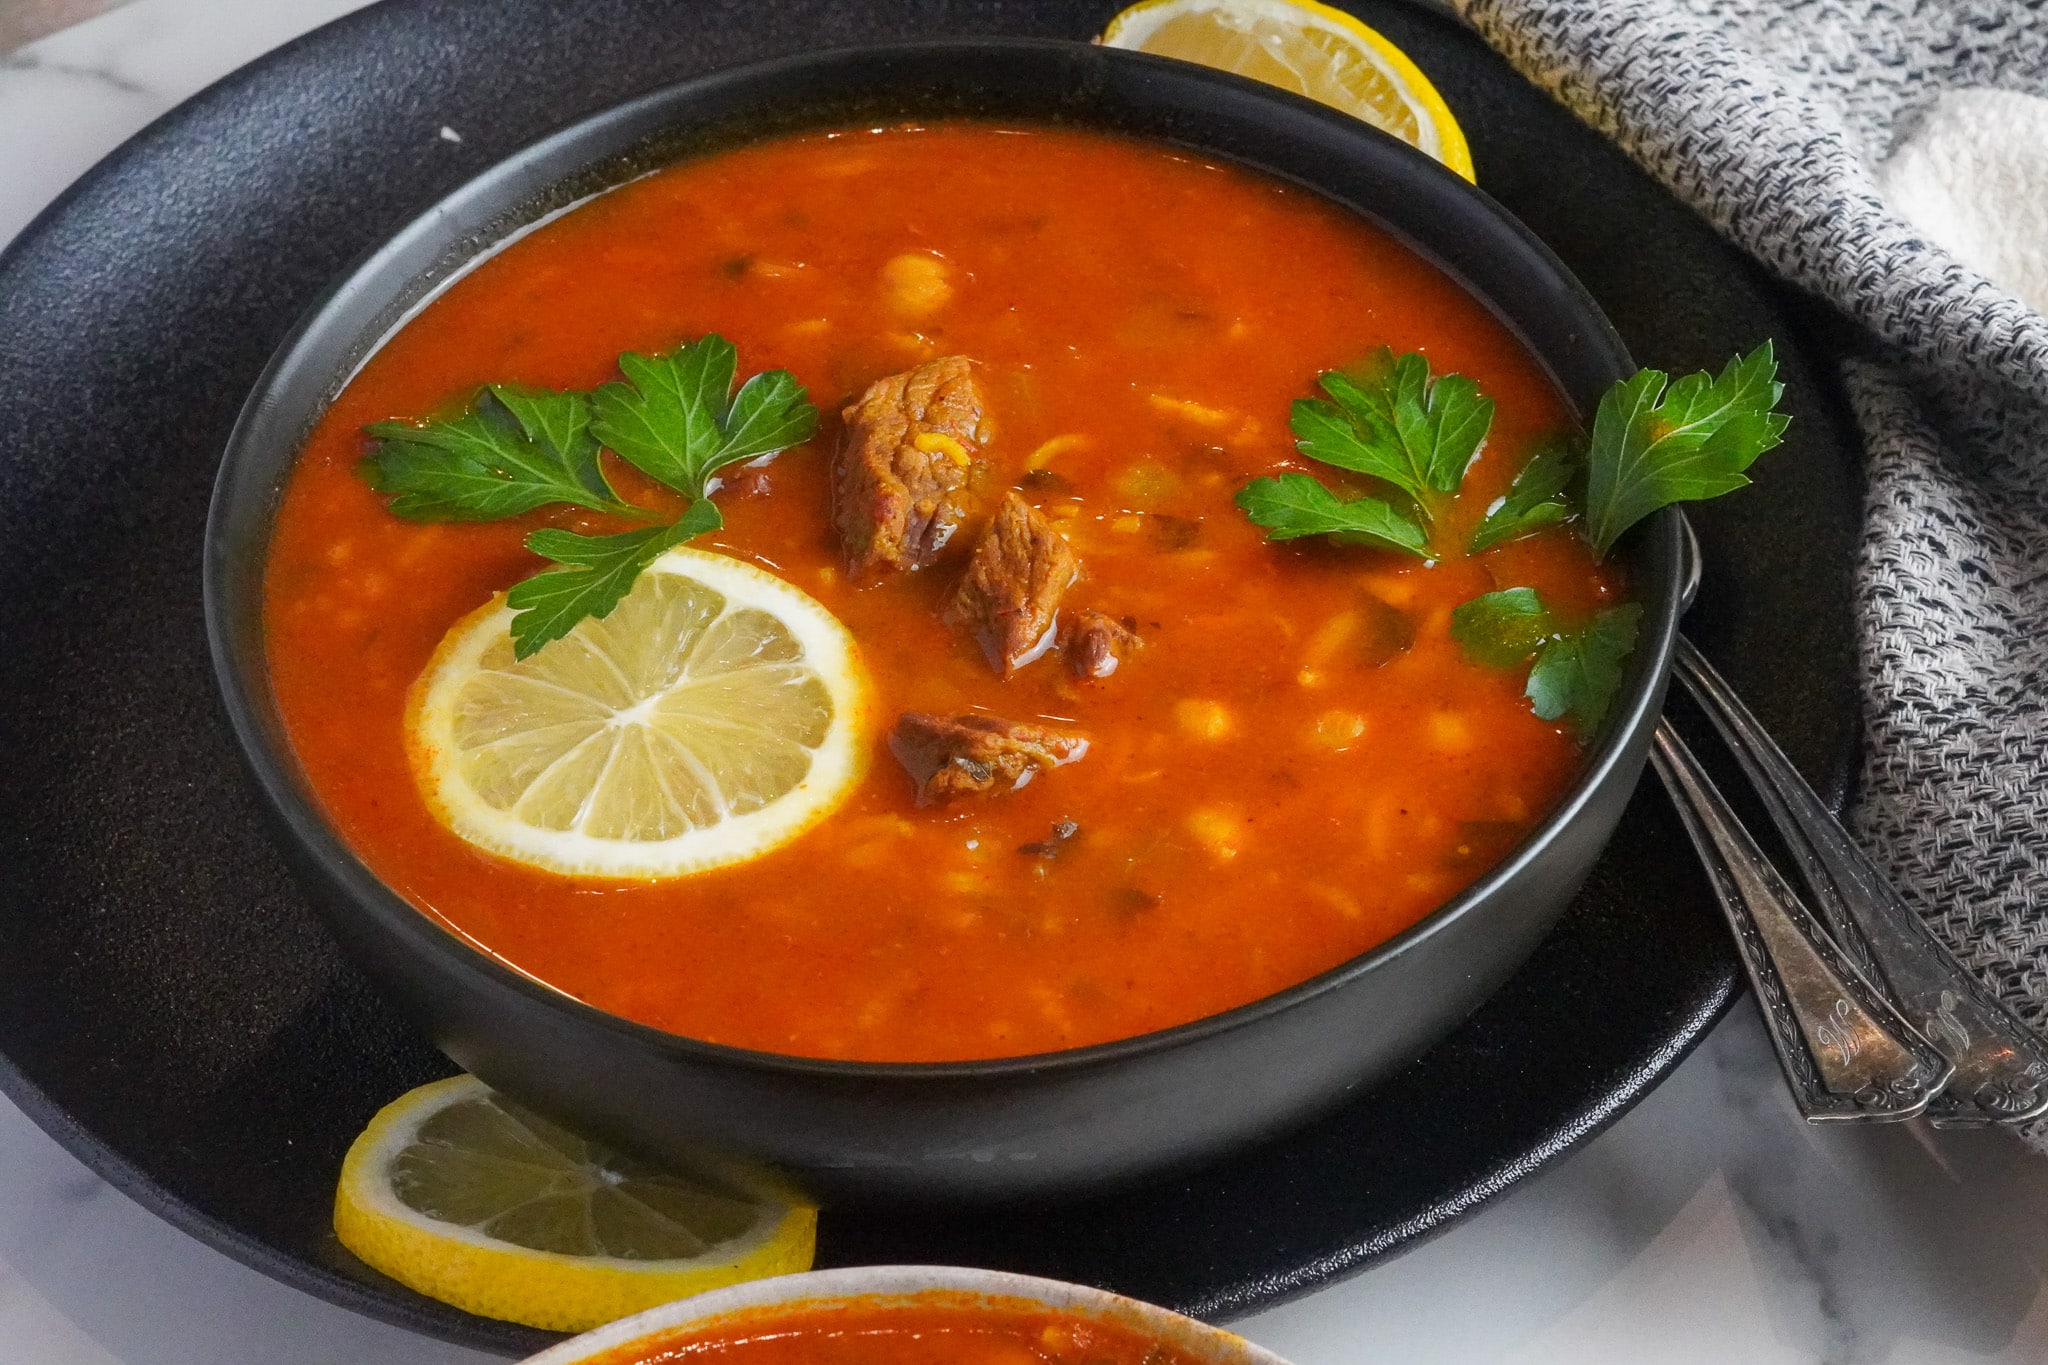 a warm bowl of delicious chickpea and beef soup served with lemon wedges and fresh parsley